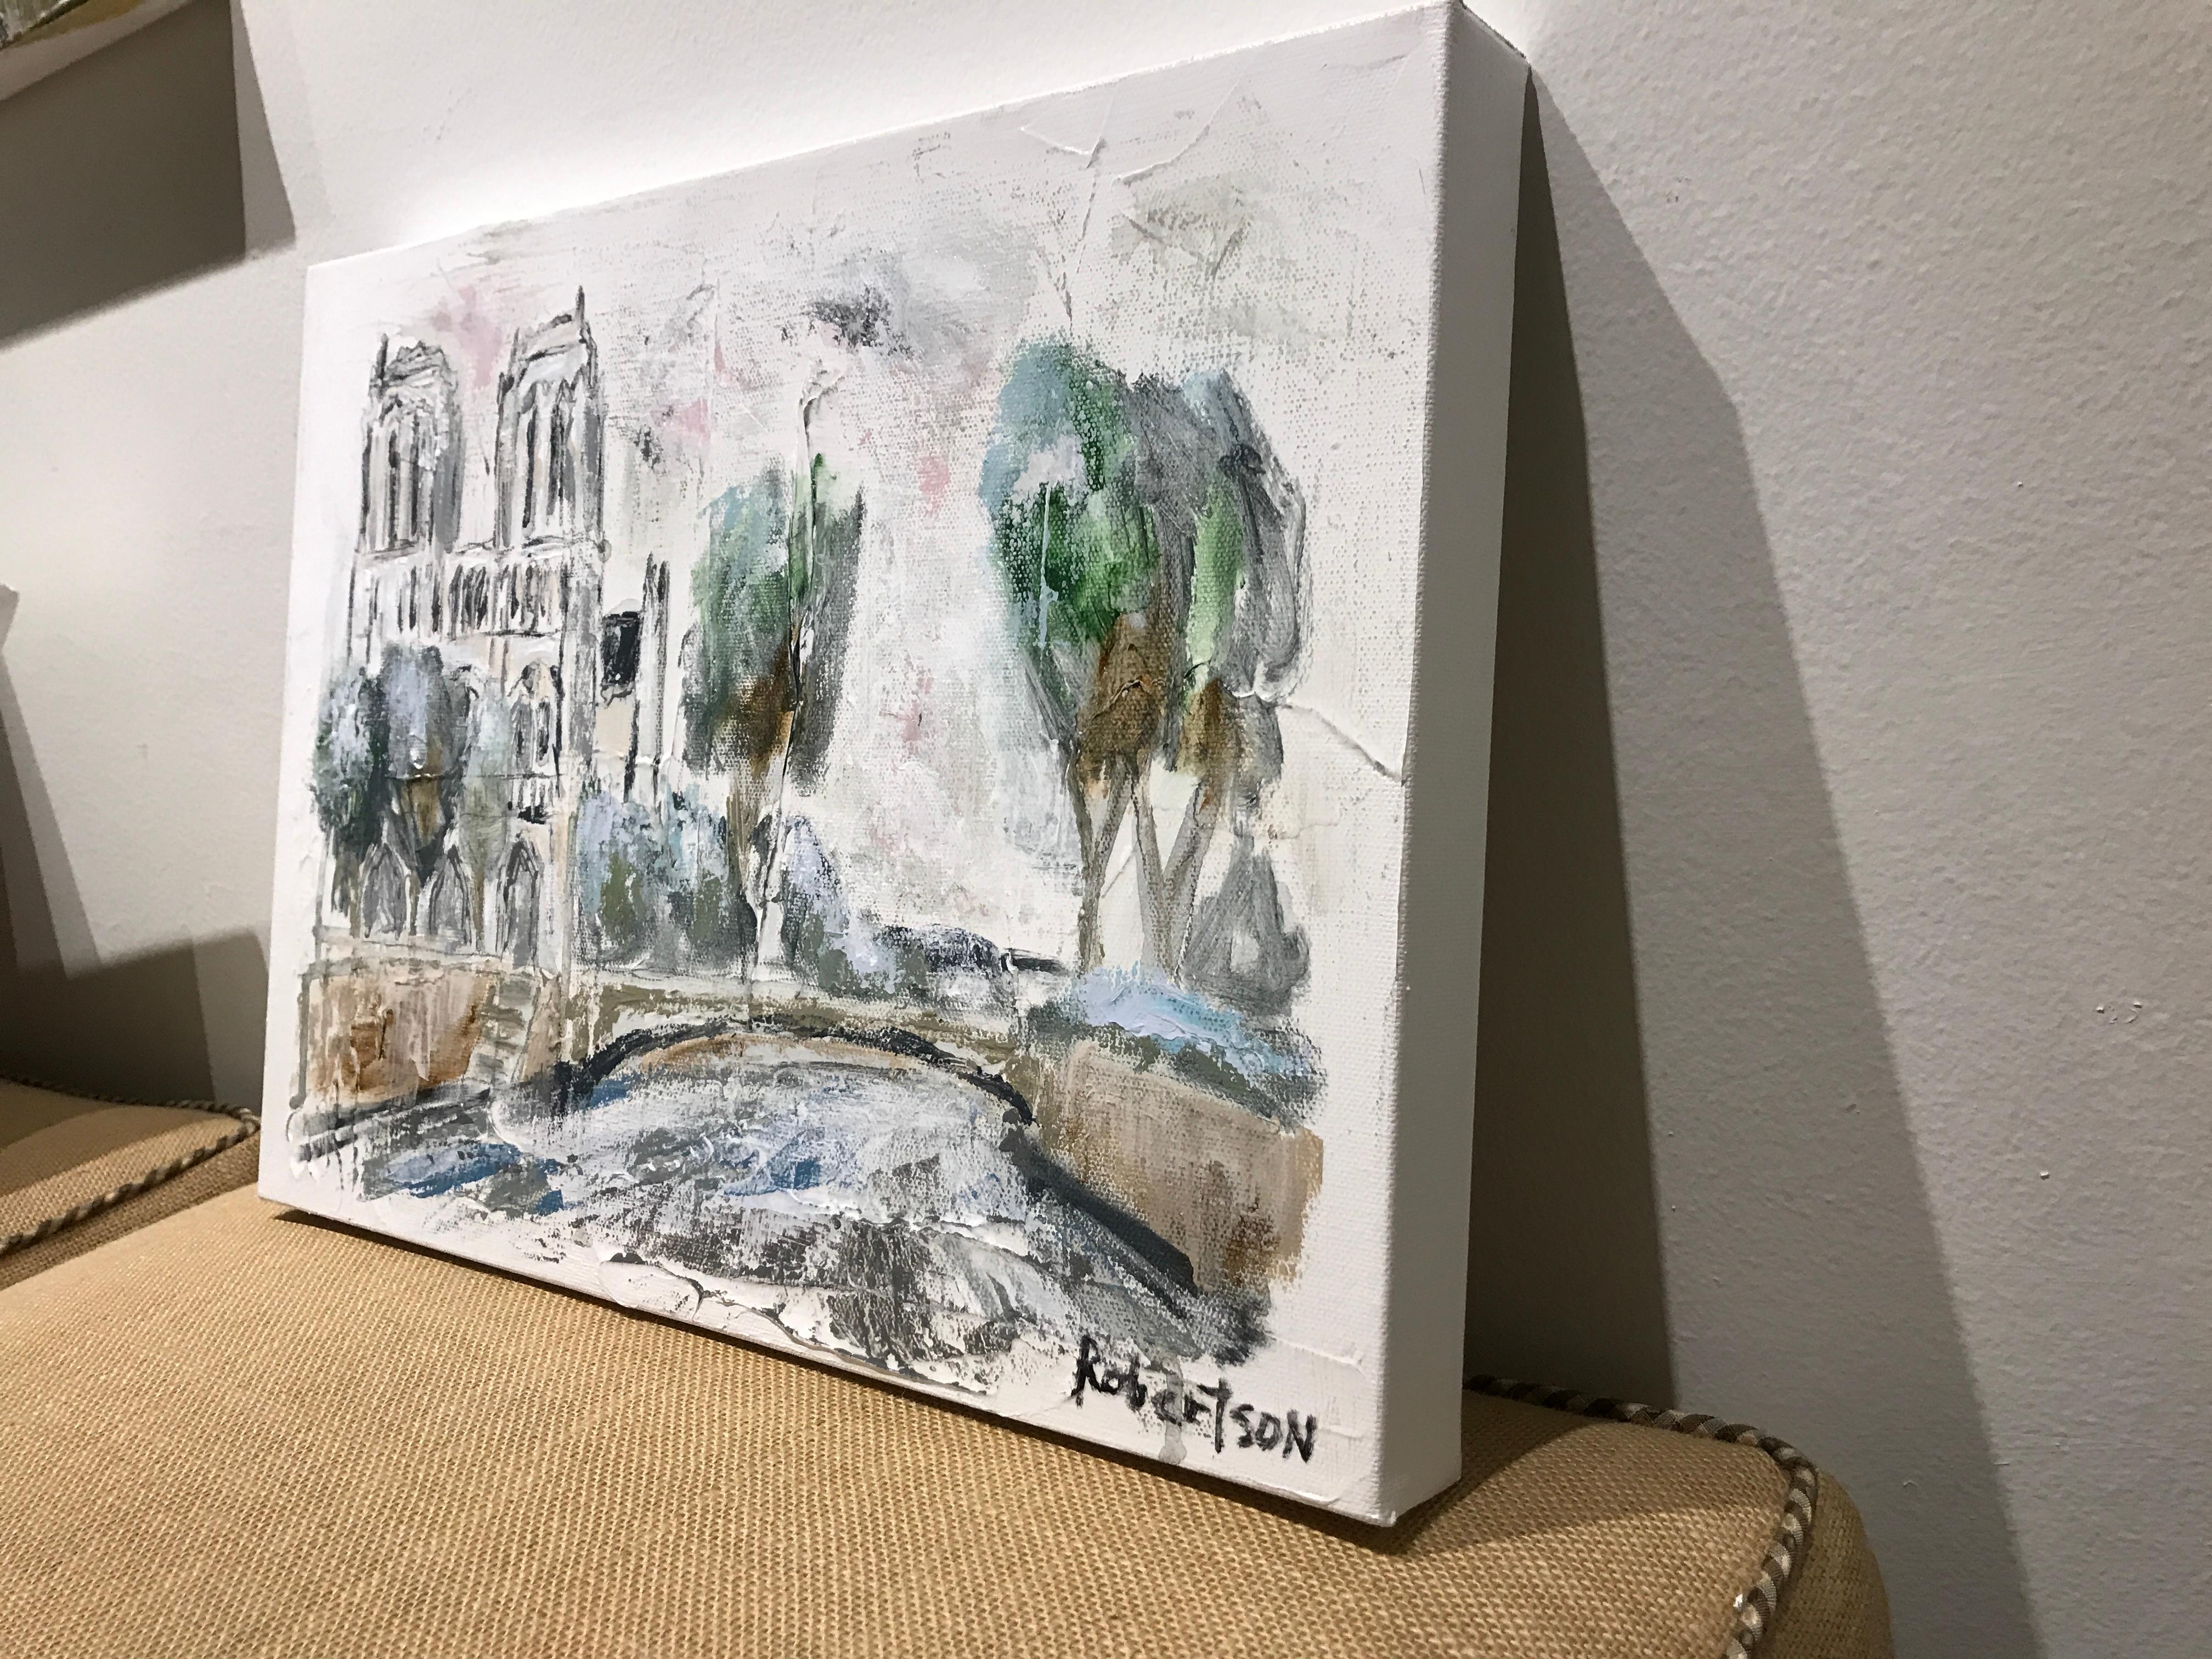 'Cathedral Notre Dame de Paris' is a small Impressionist mixed media on canvas painting created by American artist Sarah Robertson in 2018. Depicting one of Paris' landmarks, the Cathedral Notre-Dame de Paris, the painting features a soft palette